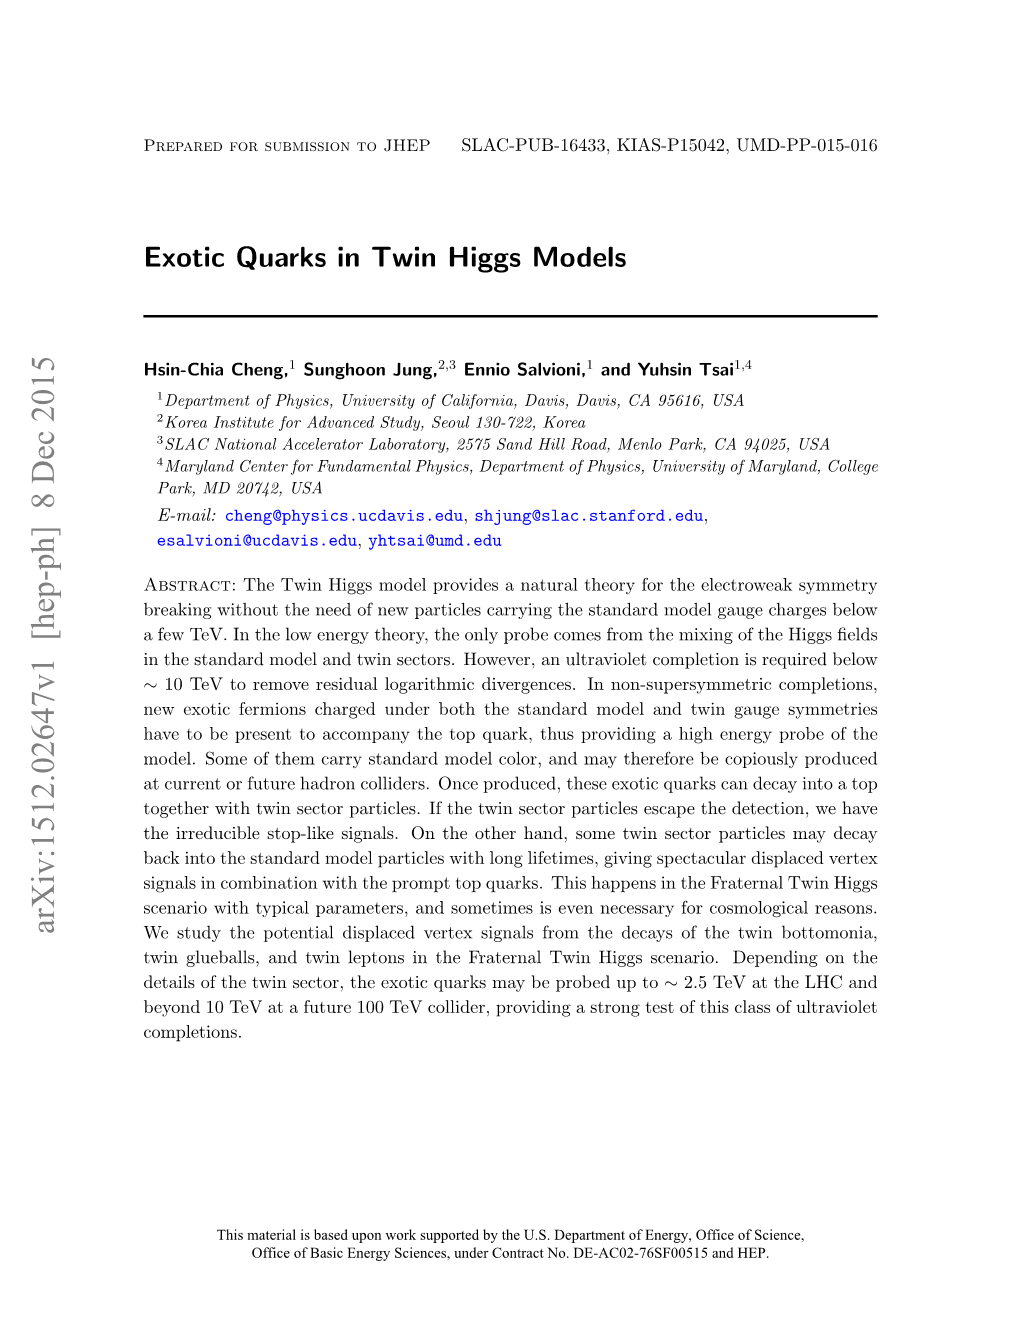 Exotic Quarks in Twin Higgs Models